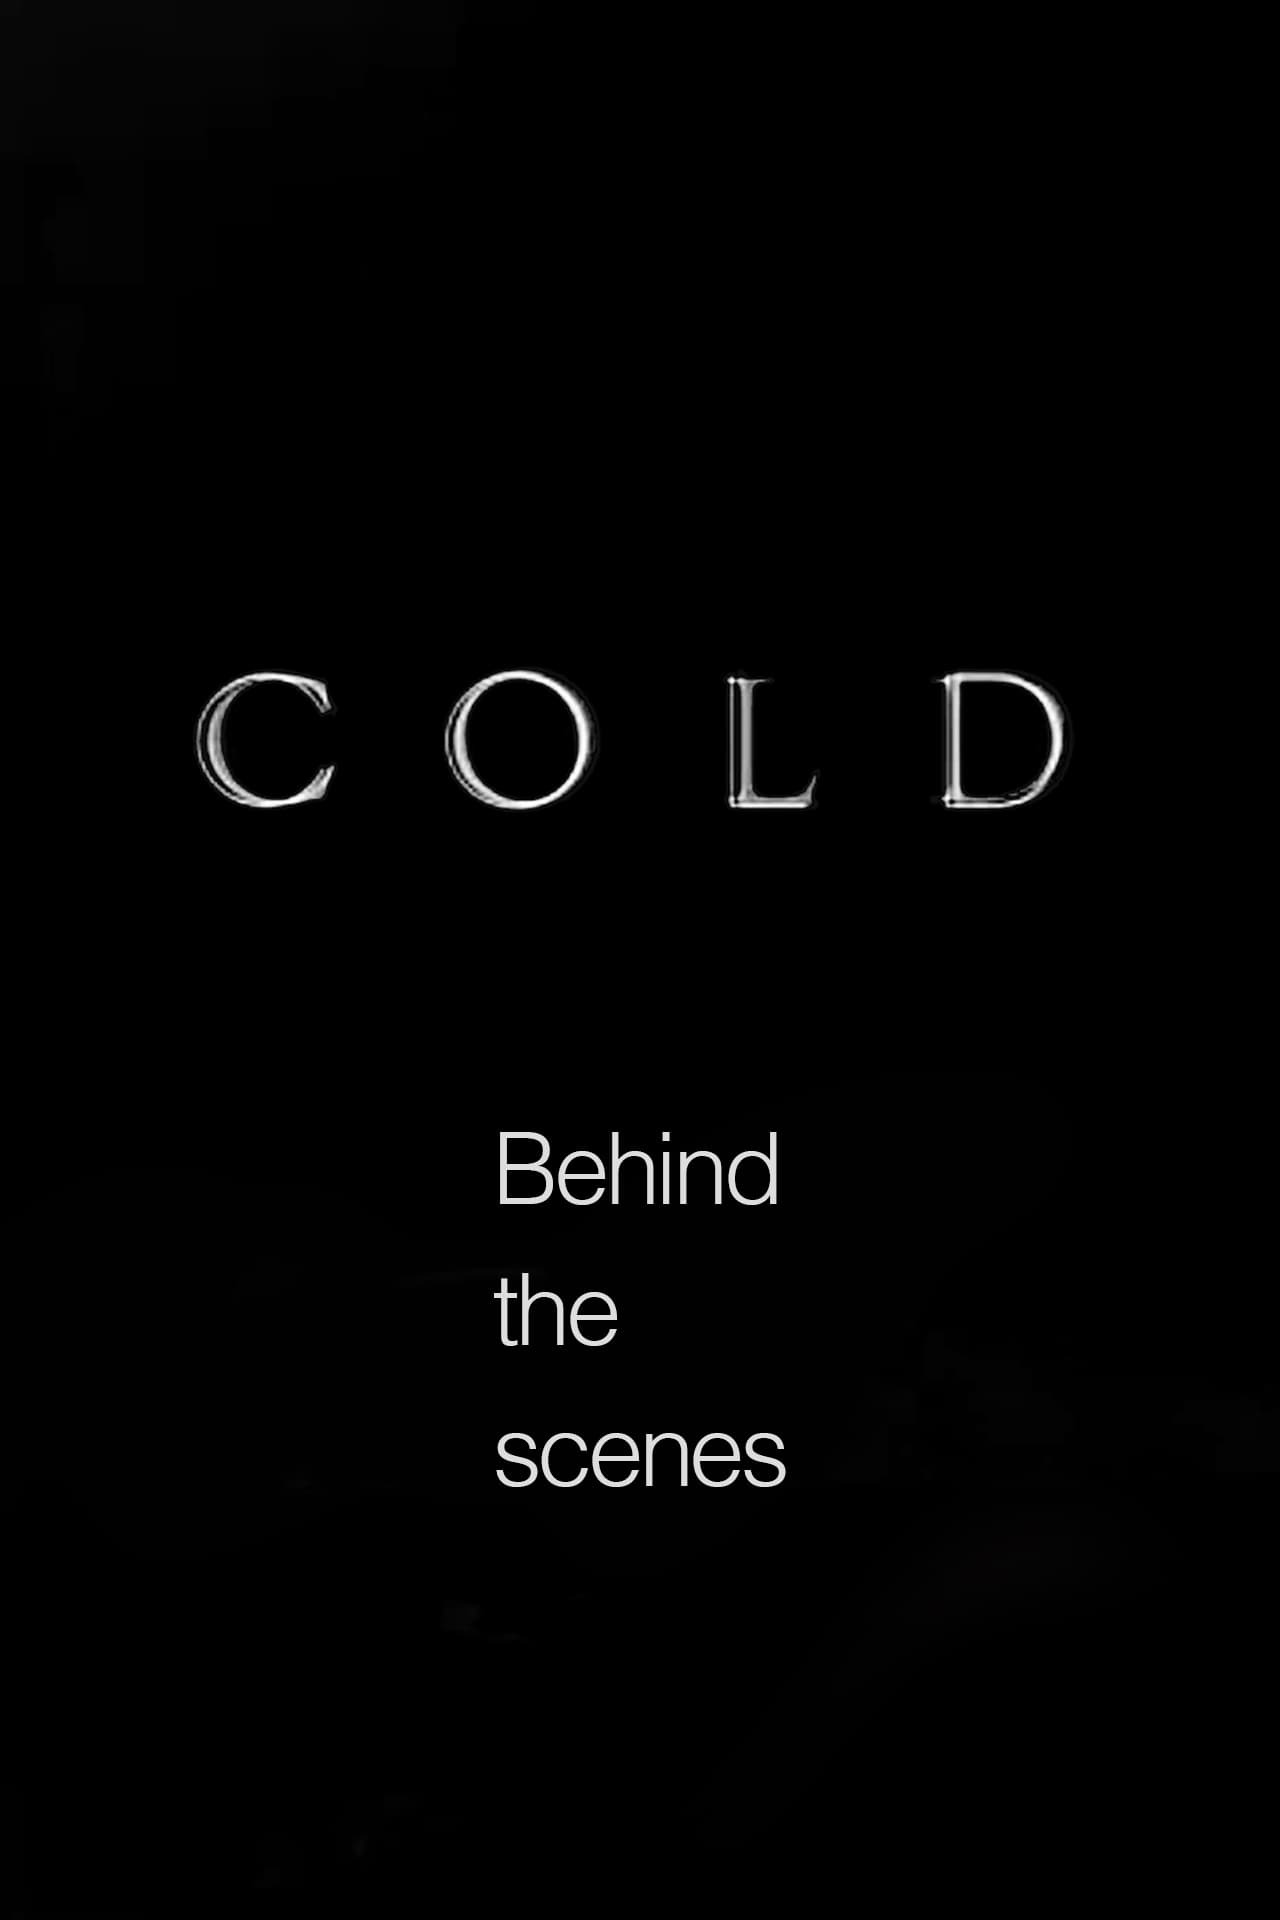 Cold - Behind the scenes